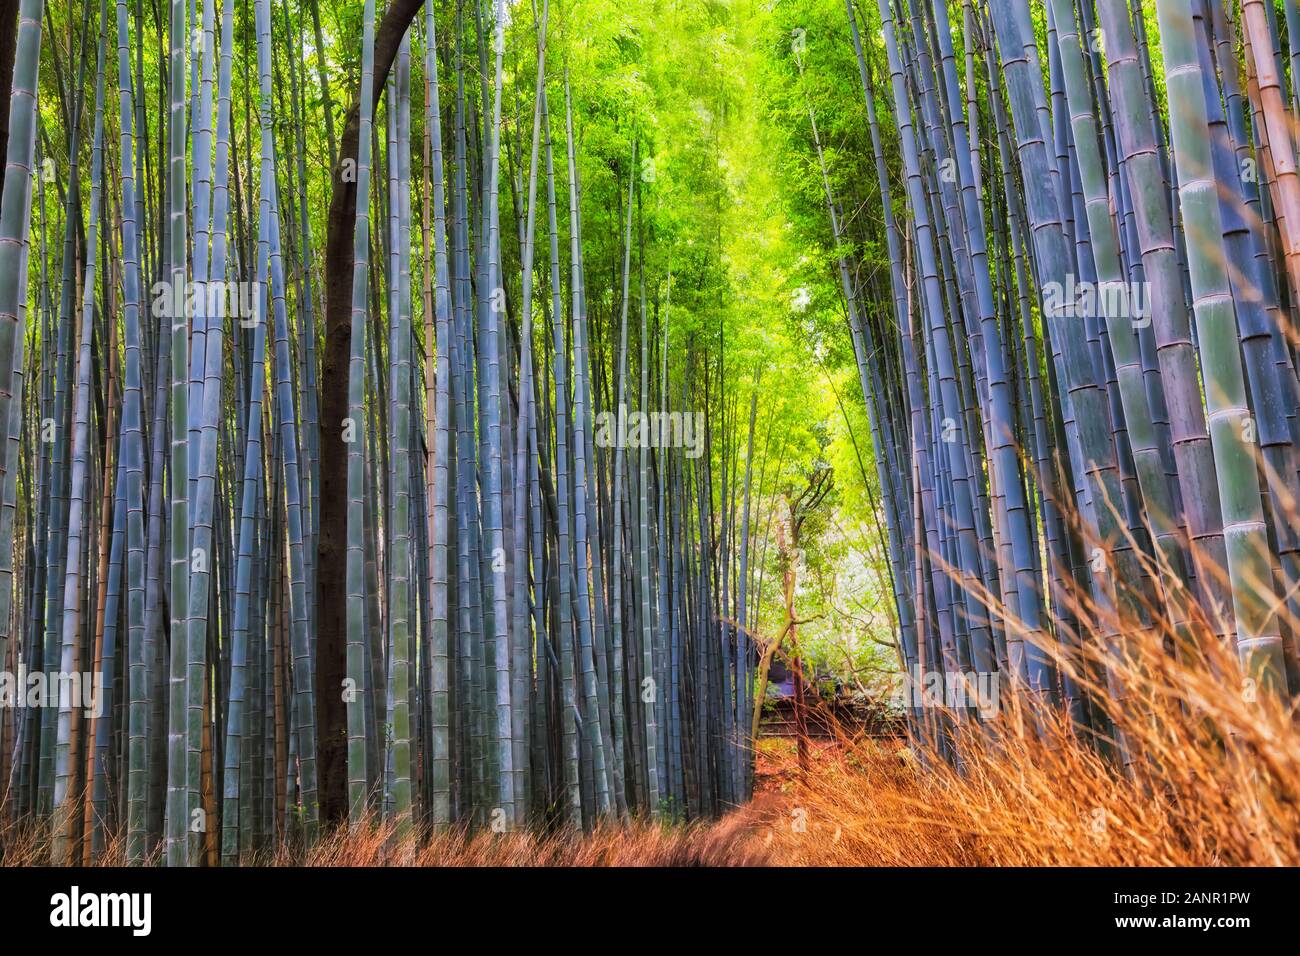 Thick bamboo forest in famous Bamboo grove of Kyoto city in Japan - tall evergreen trees grow over popular walking path through the woods. Stock Photo